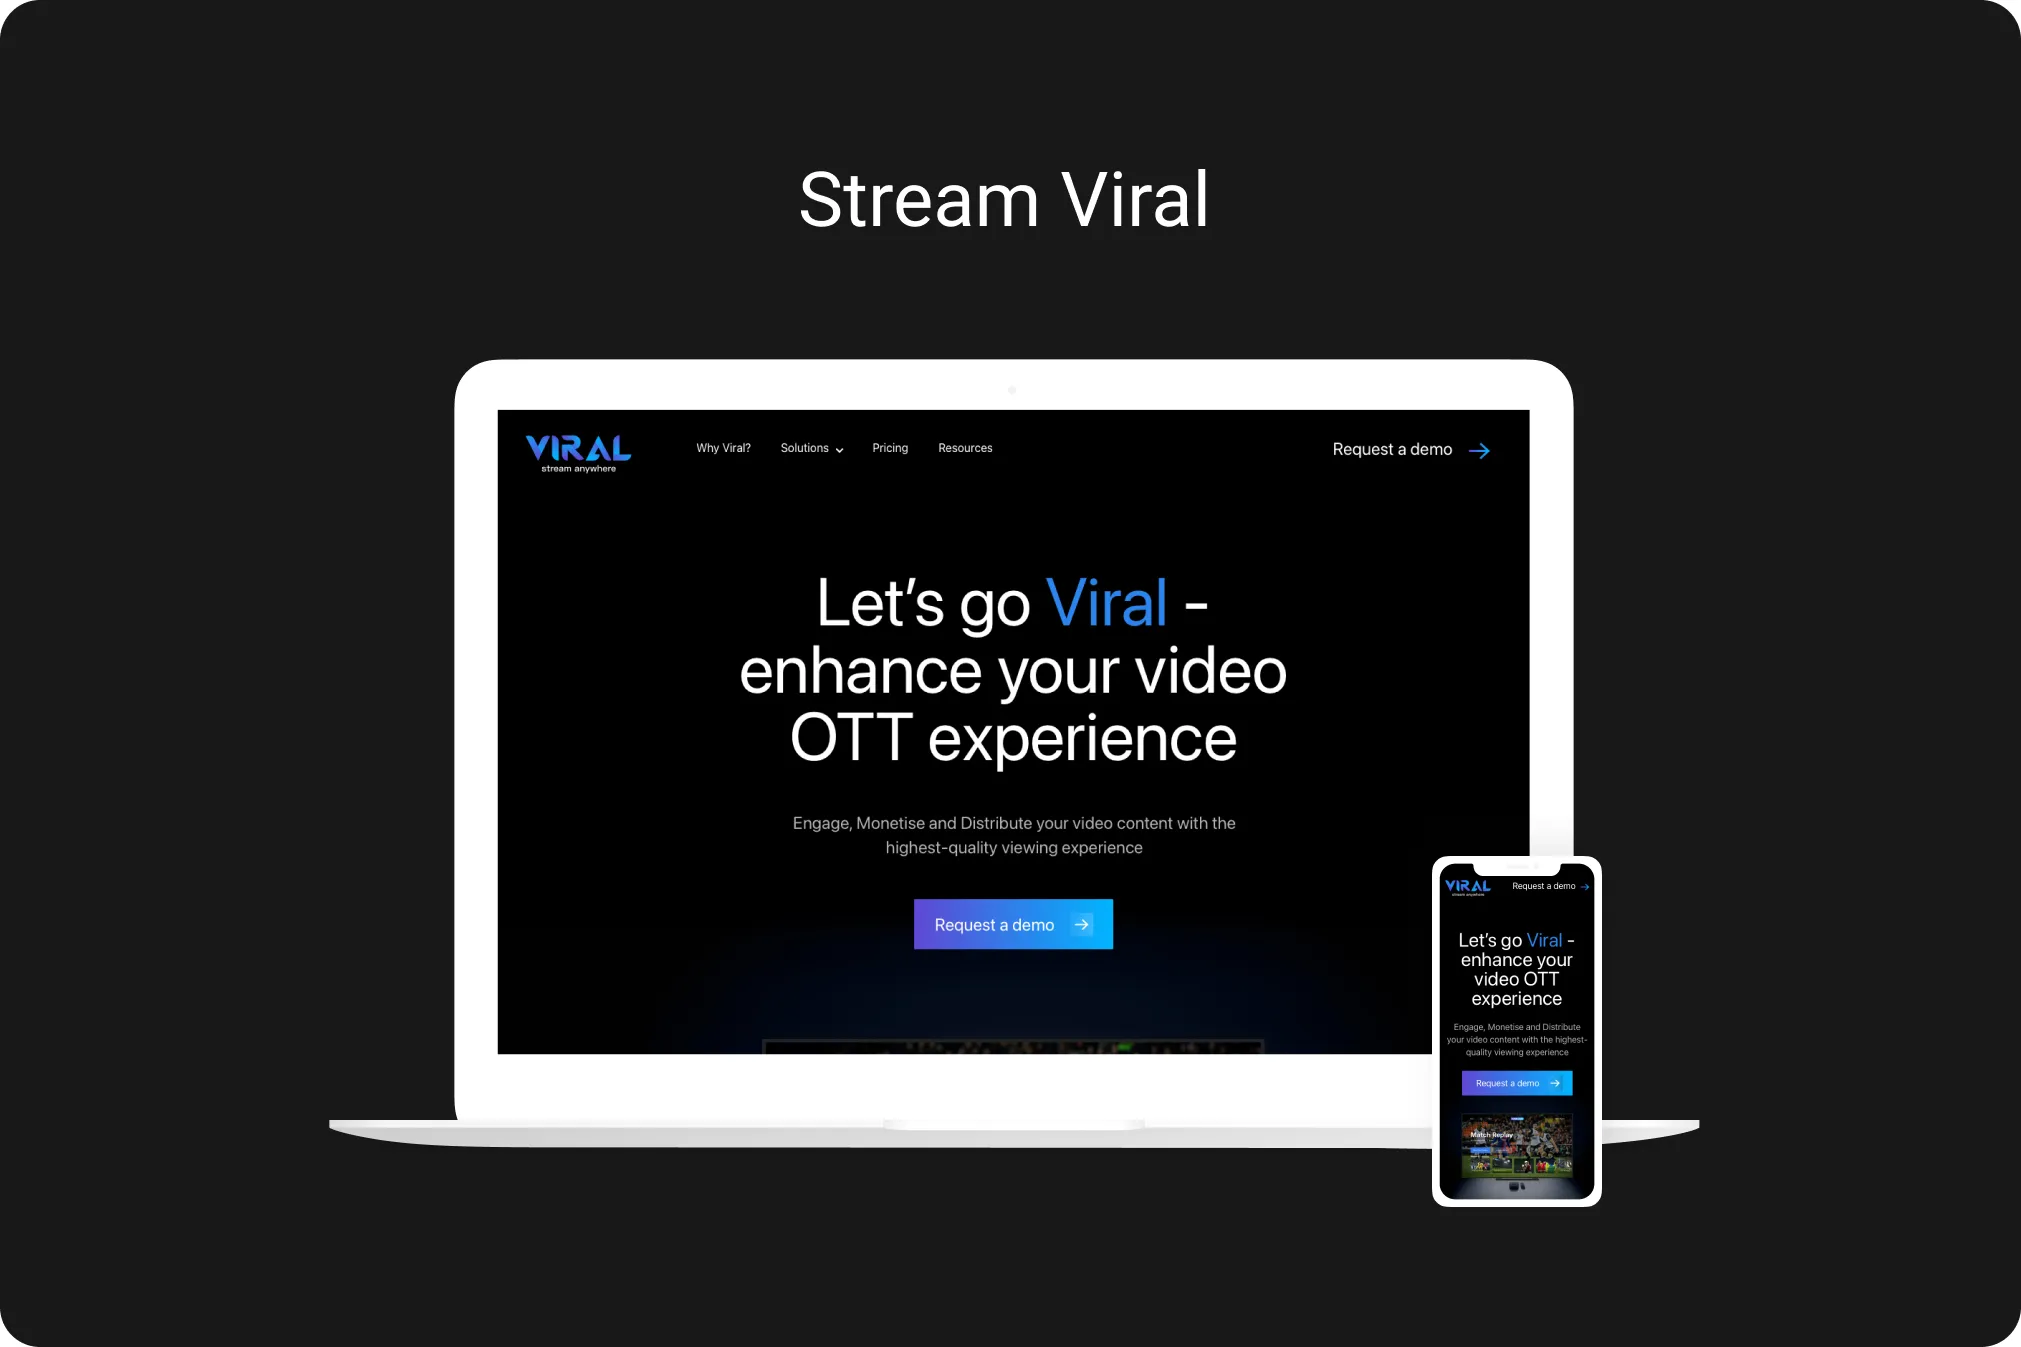 Case Study - Launch Your OTT Channel Today with Stream Viral